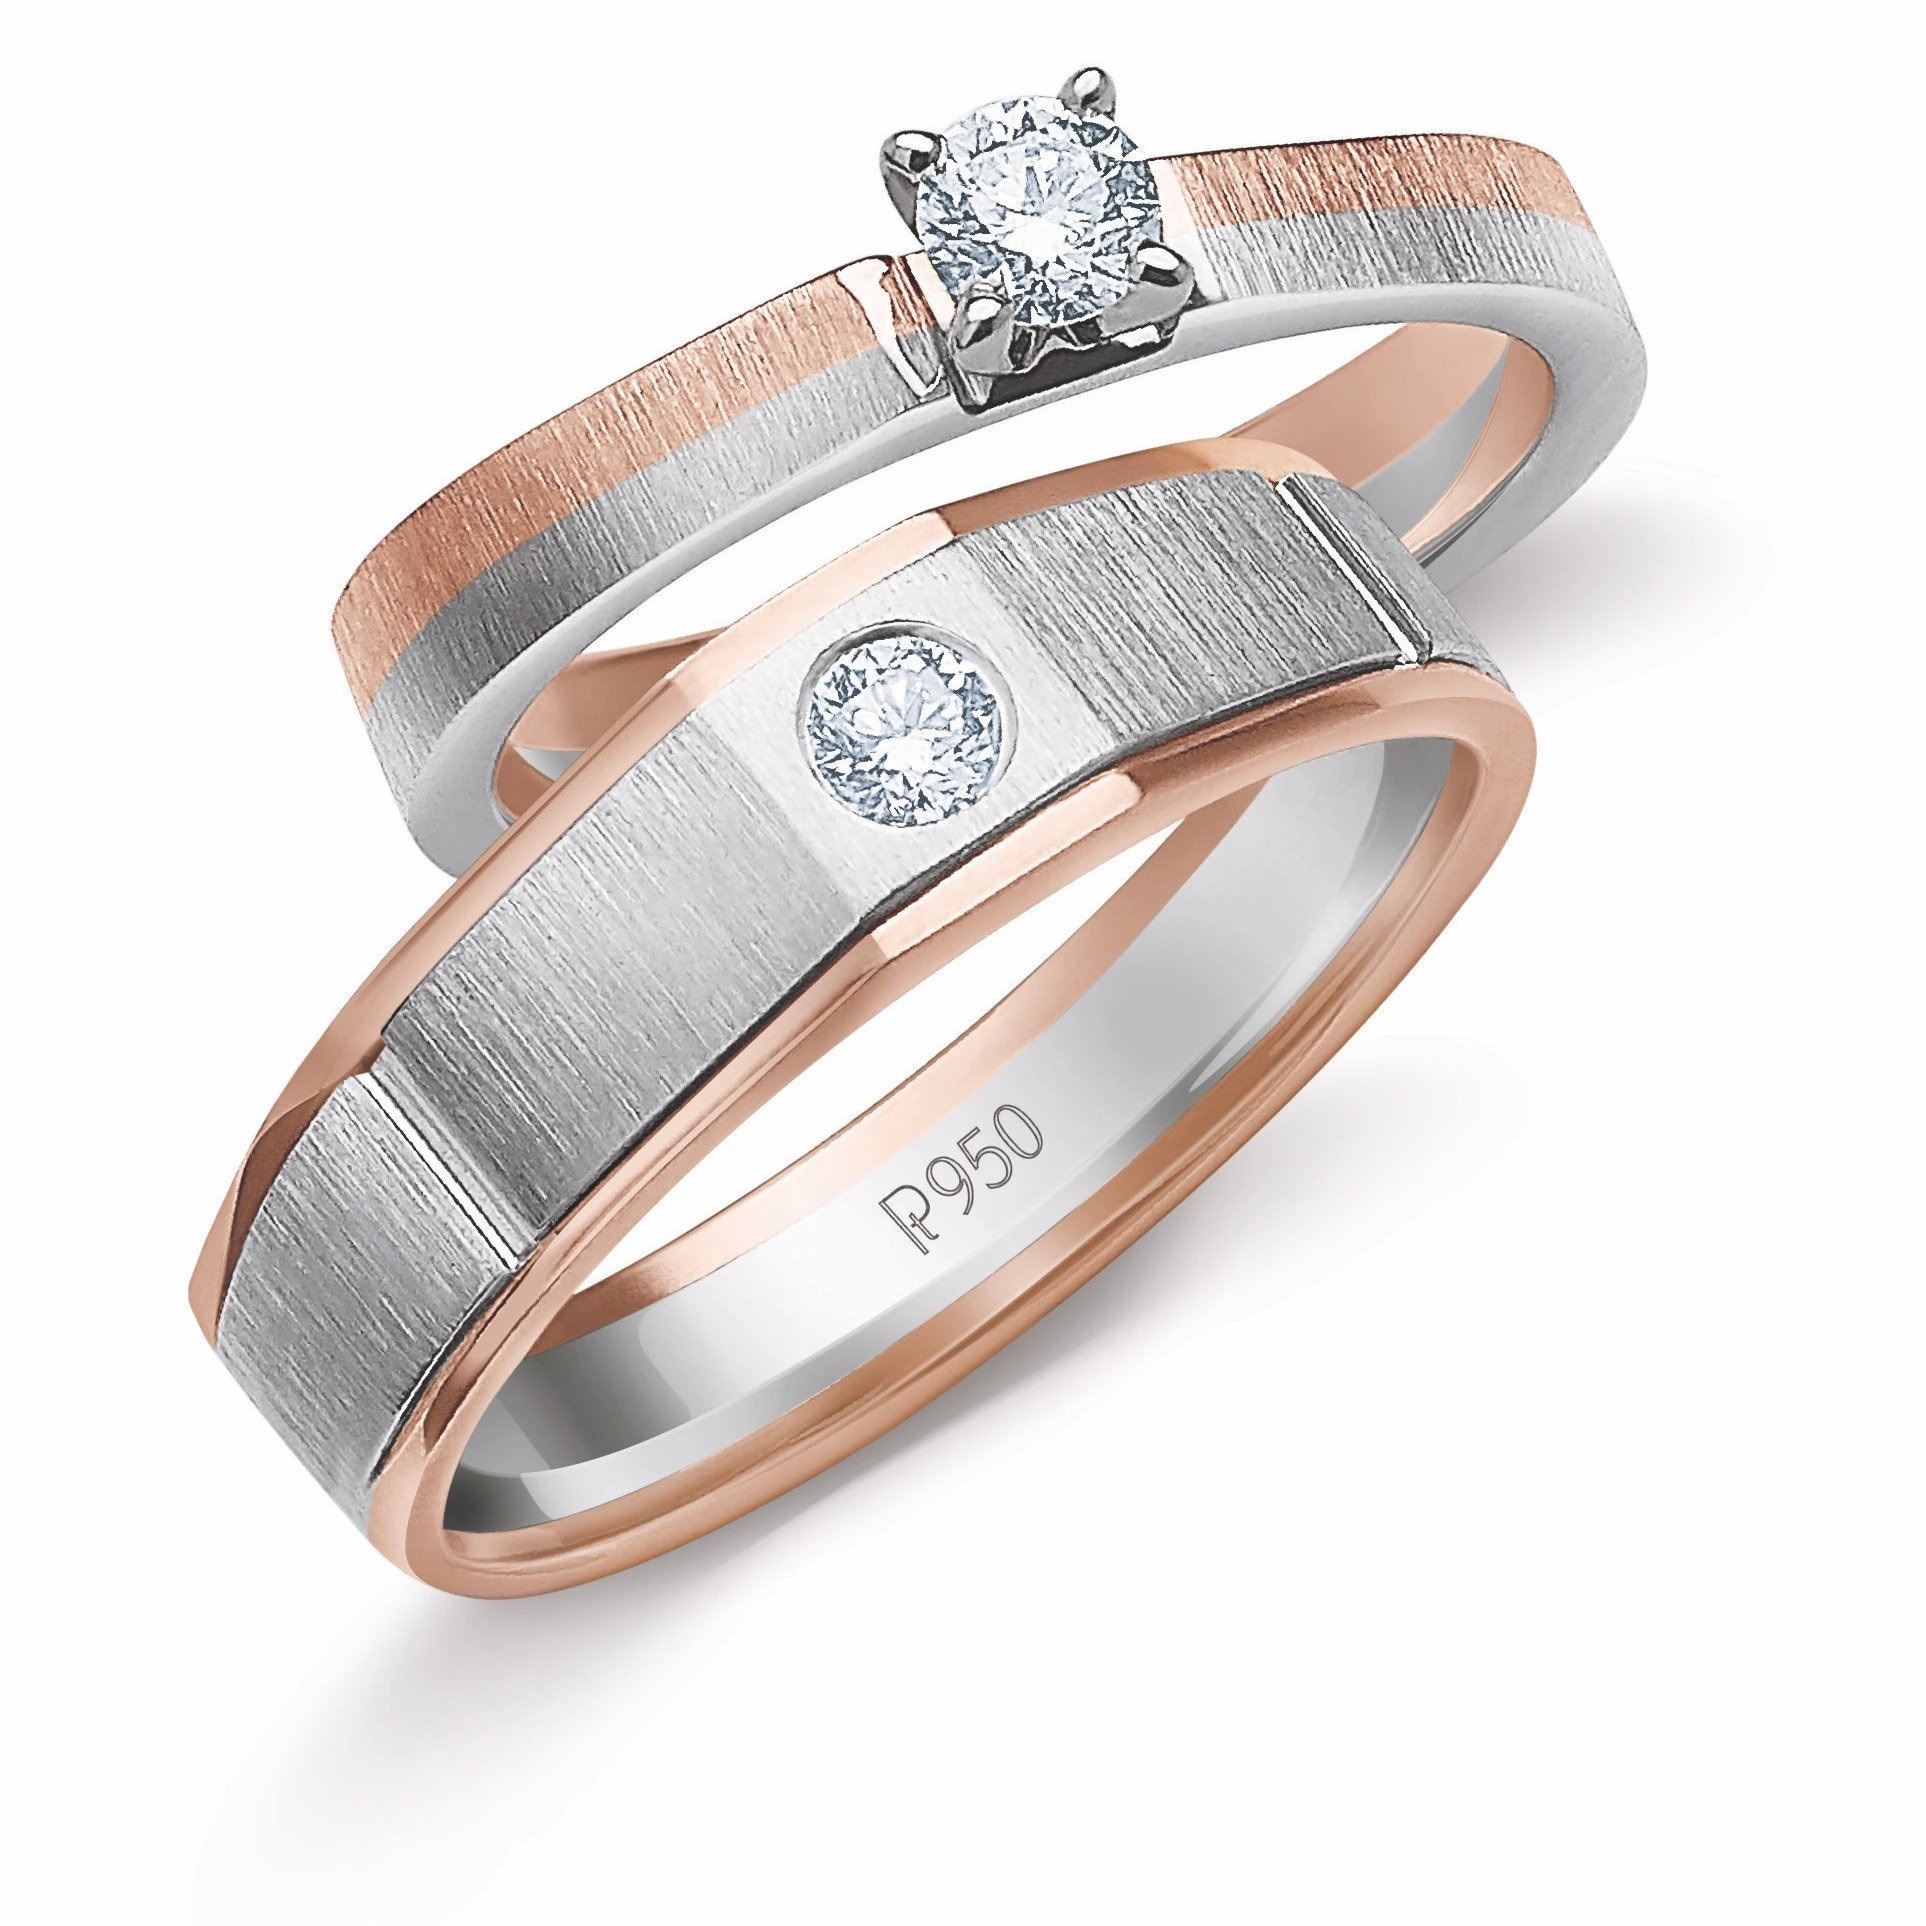 Buy Platinum Couple Rings And Wedding Bands | Platinum Wedding Rings |